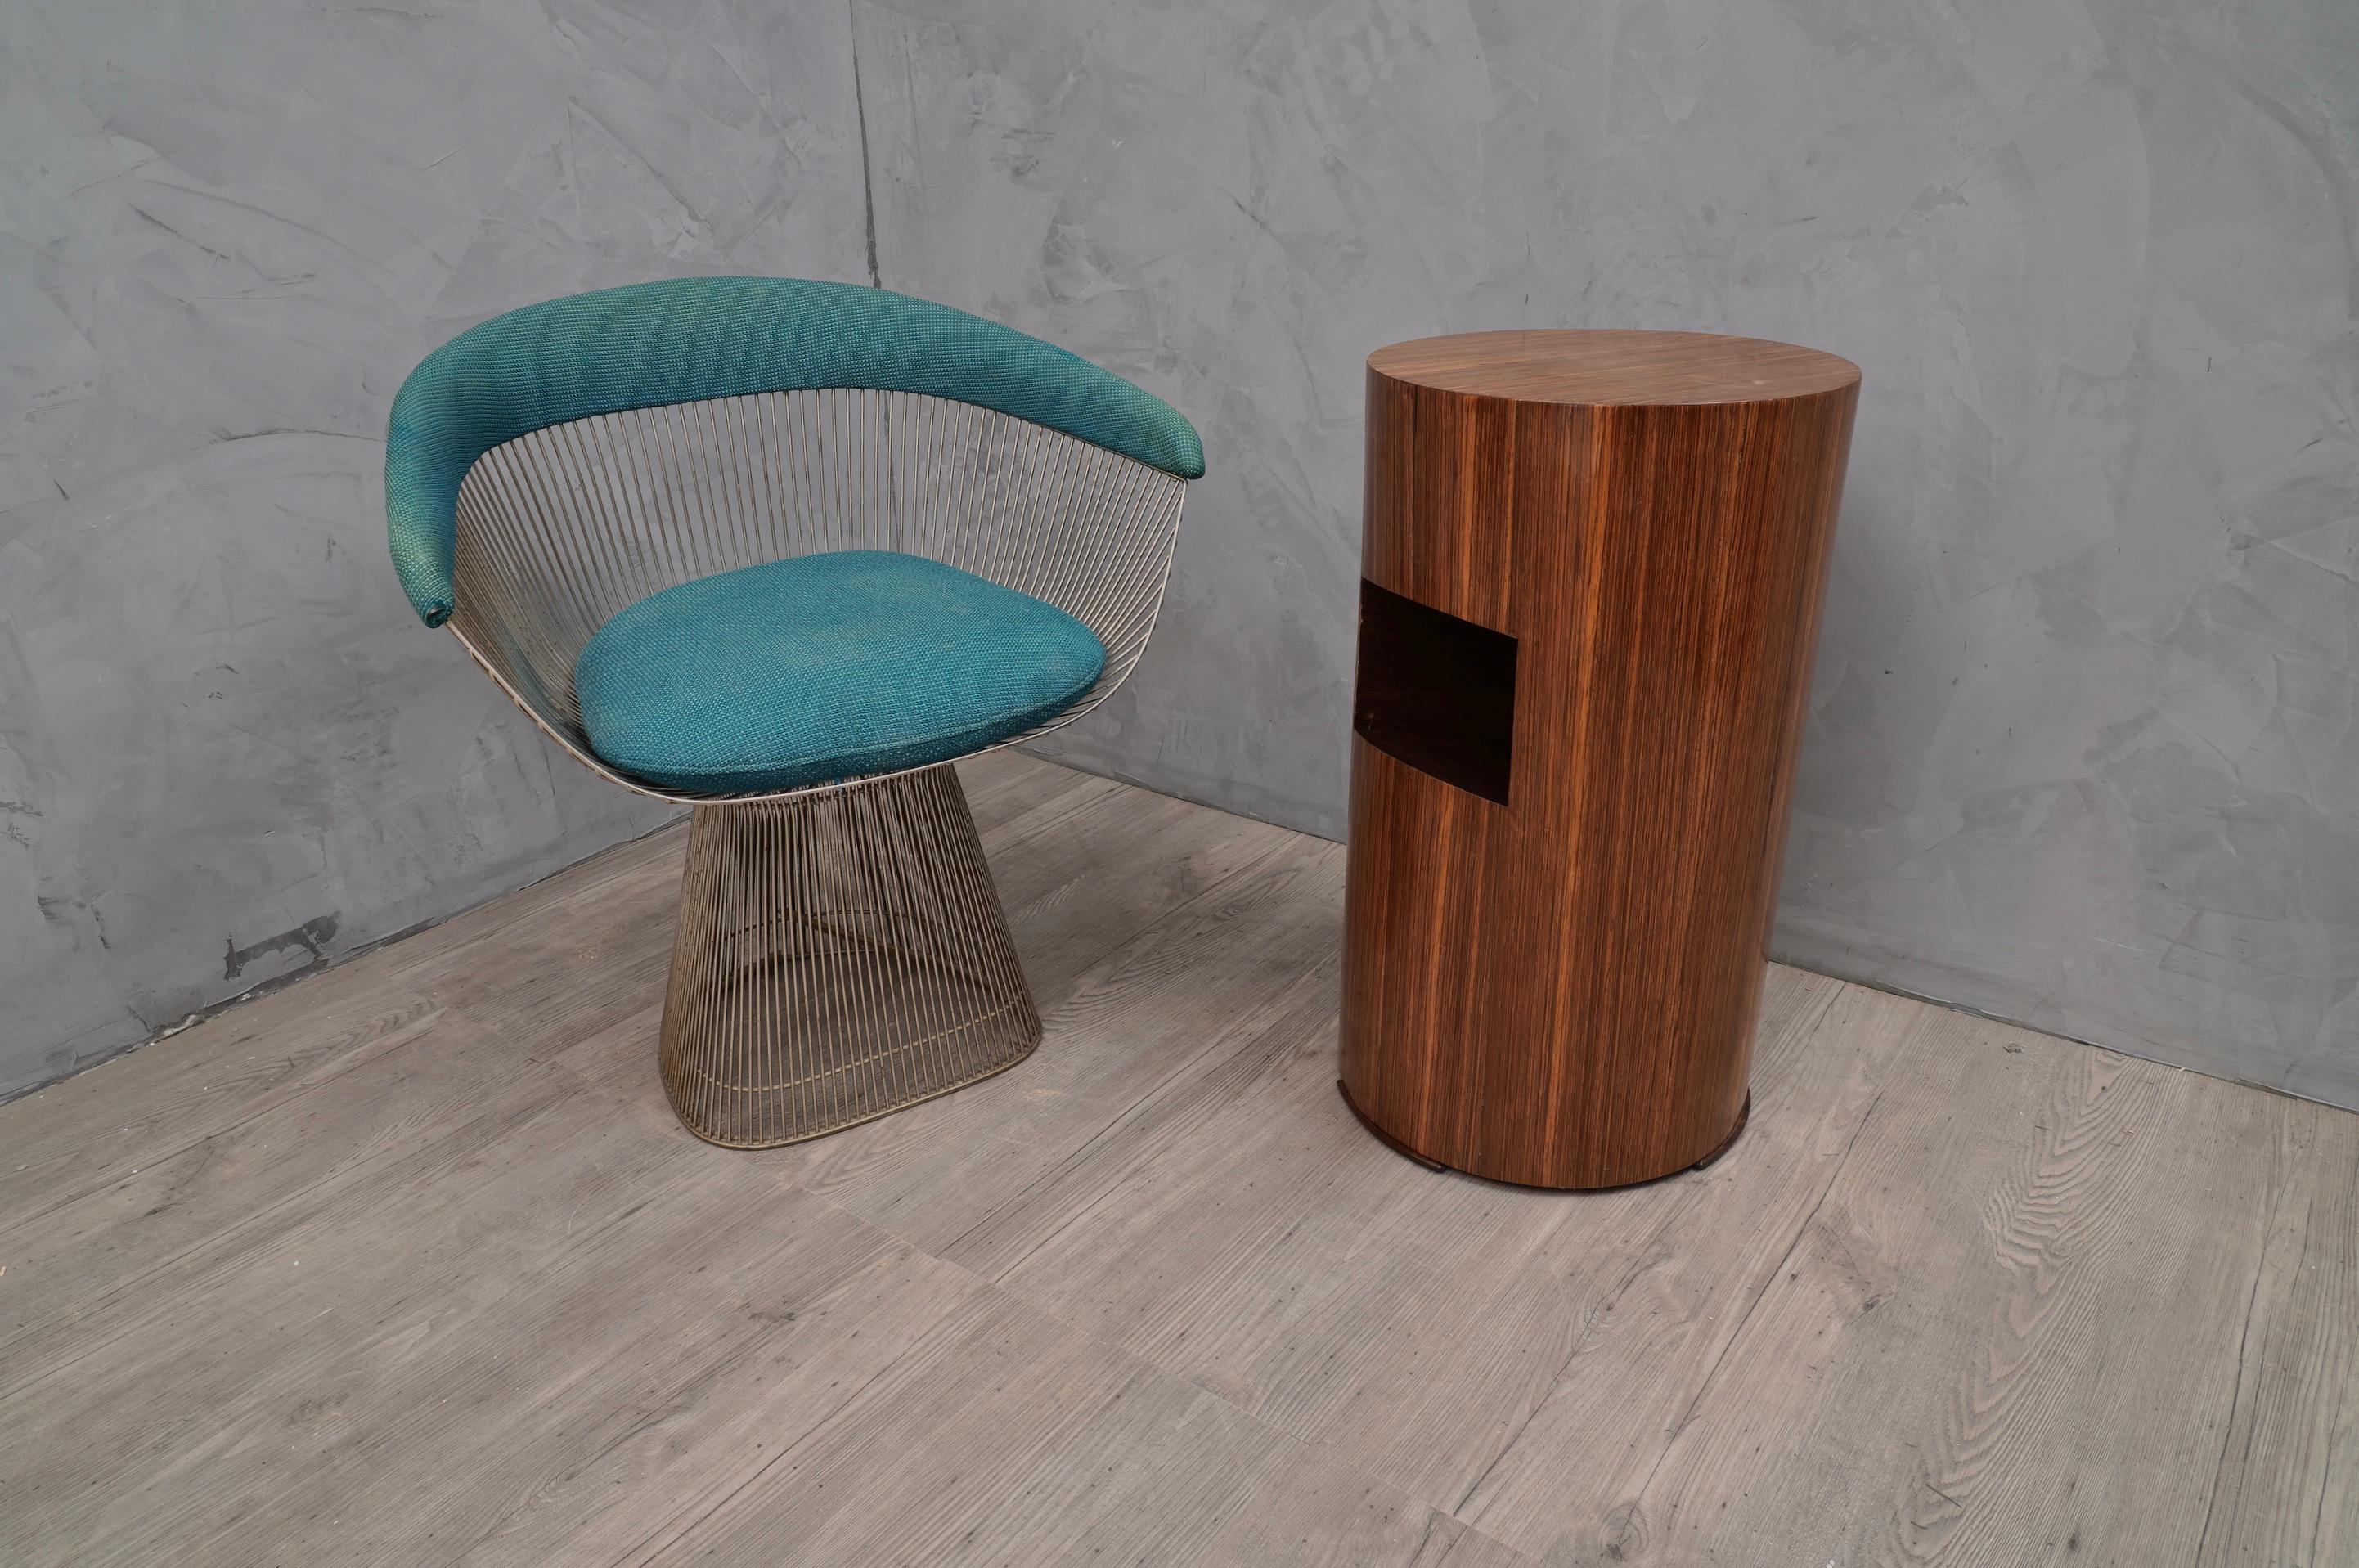 Italian Art Deco tables. All veneered in zebra wood. 

Cylindrical shape with a hole as a magazine holder. The veneer is very particular positioned with the veining from the top downwards. Also the top is veneered in zebra wood and forms a sharp